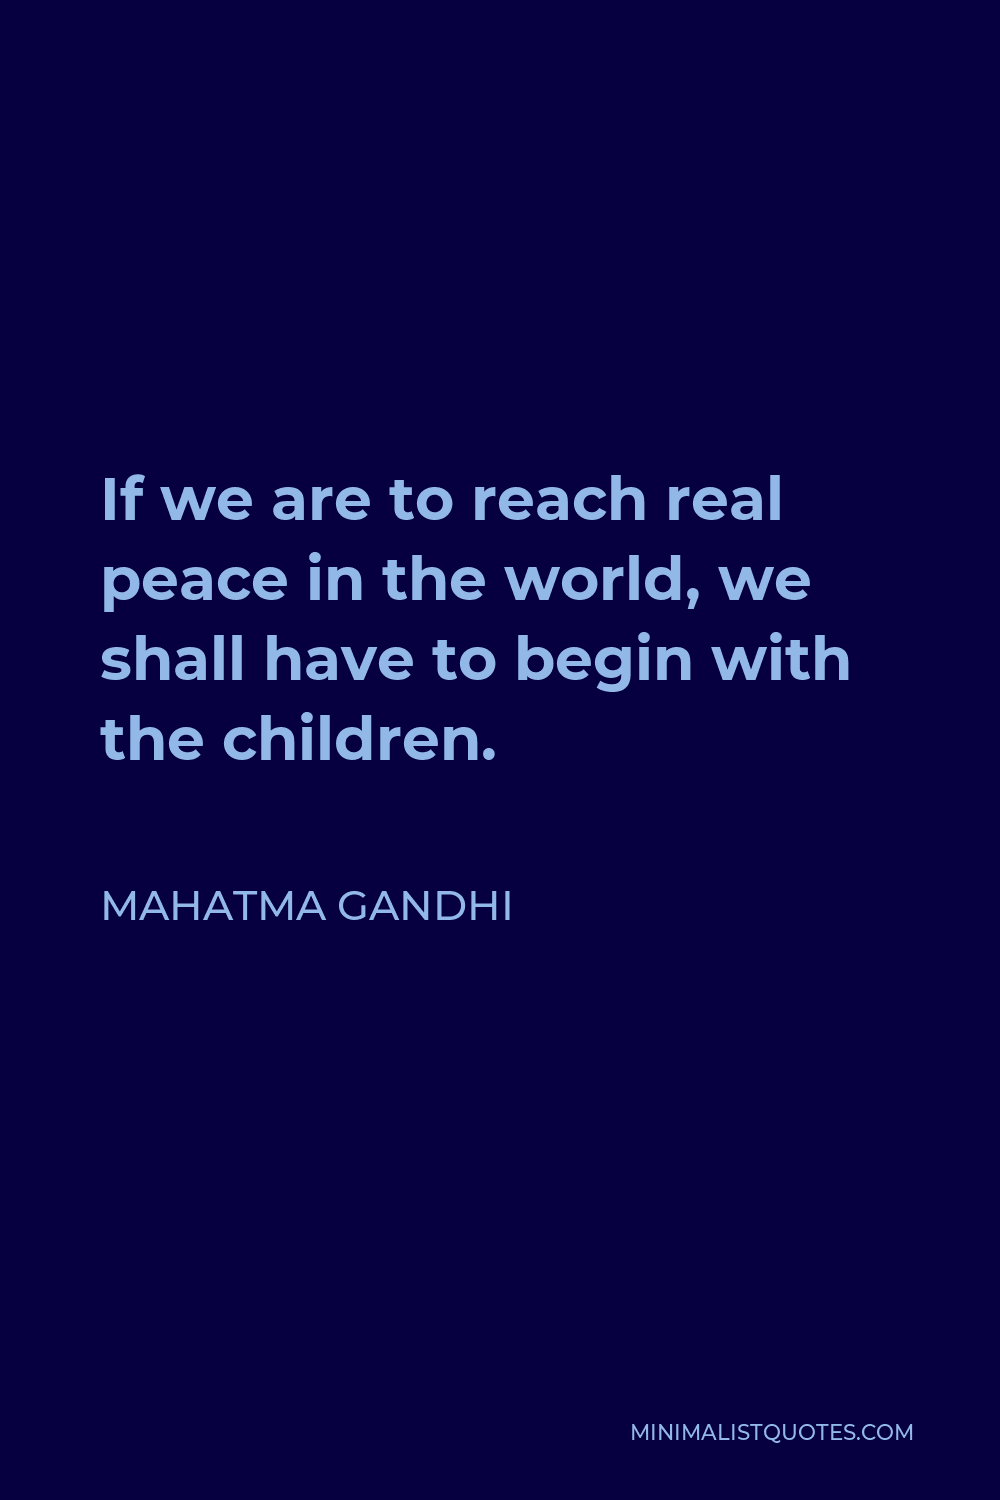 Mahatma Gandhi Quote: If we are to reach real peace in the world, we ...